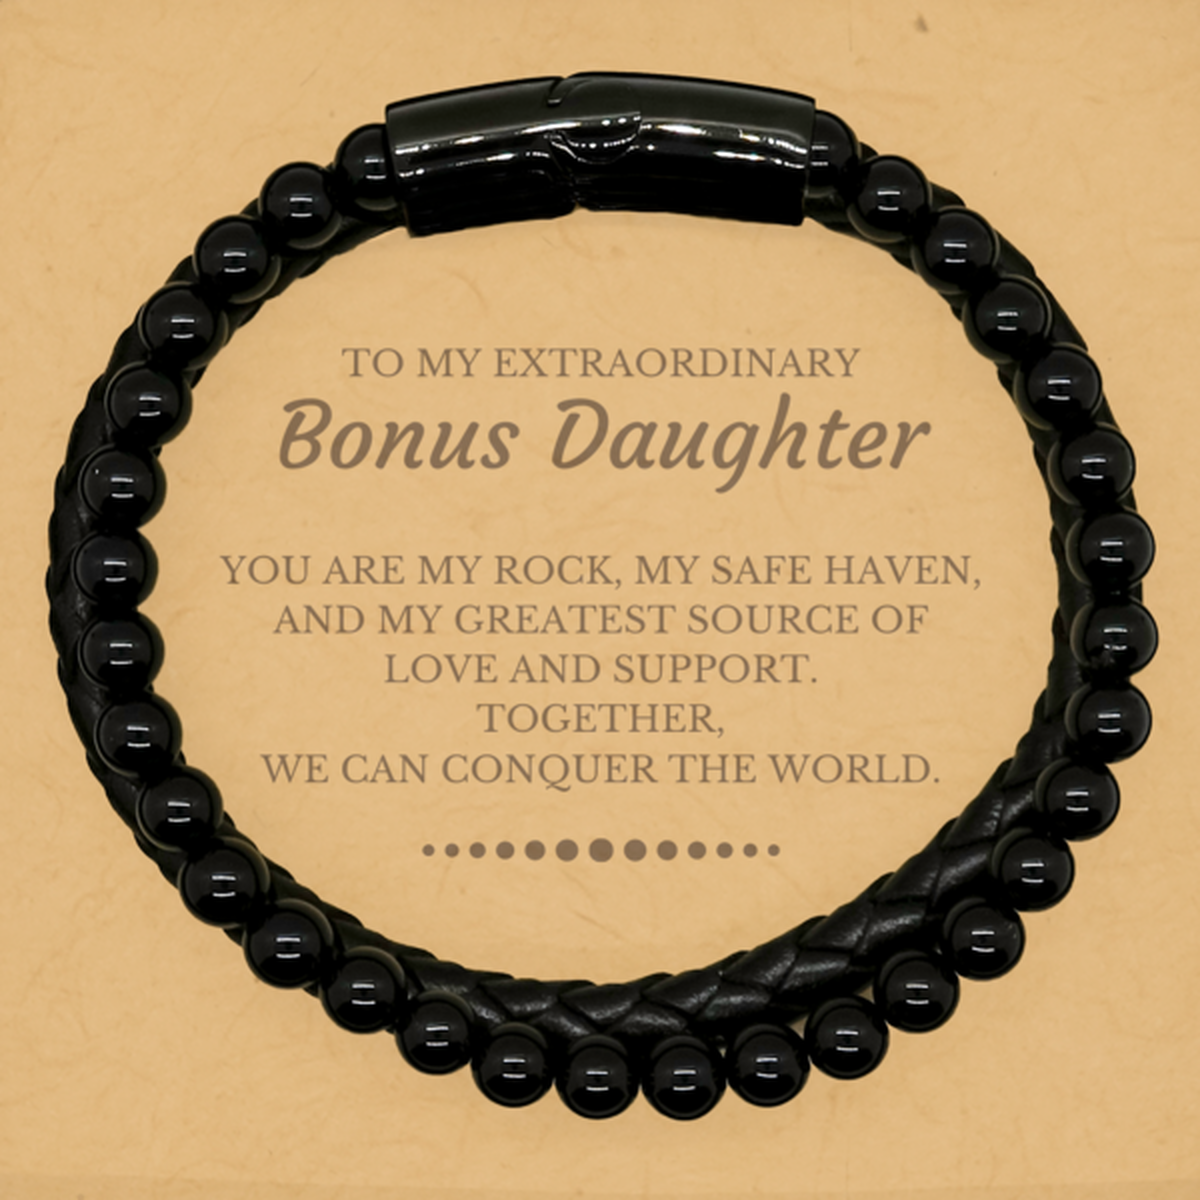 To My Extraordinary Bonus Daughter Gifts, Together, we can conquer the world, Birthday Stone Leather Bracelets For Bonus Daughter, Christmas Gifts For Bonus Daughter